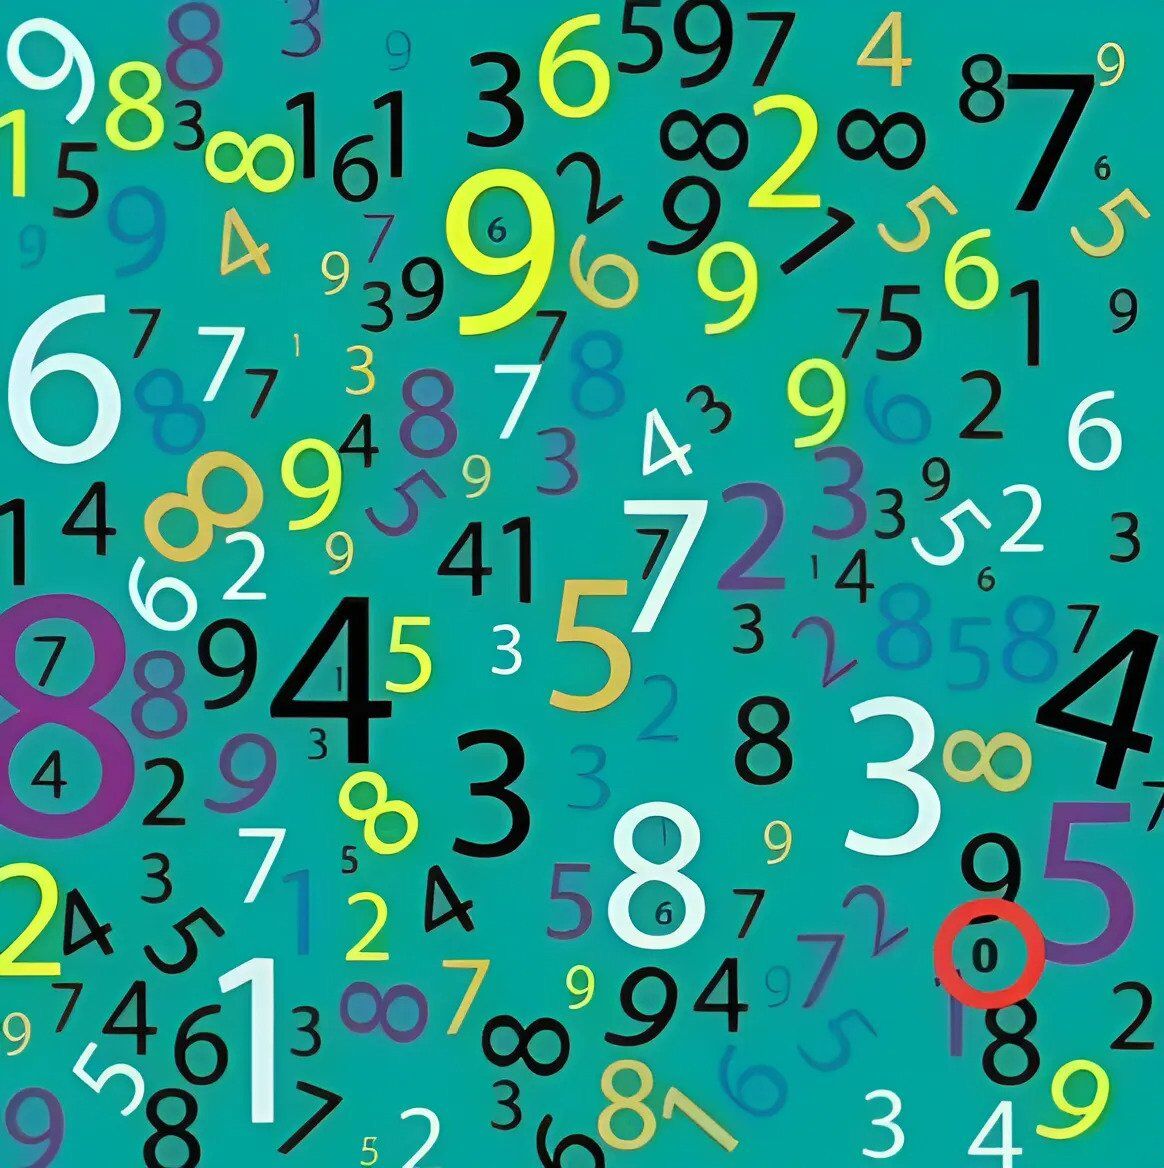 Puzzle for the smartest: test yourself and try to find the hidden number